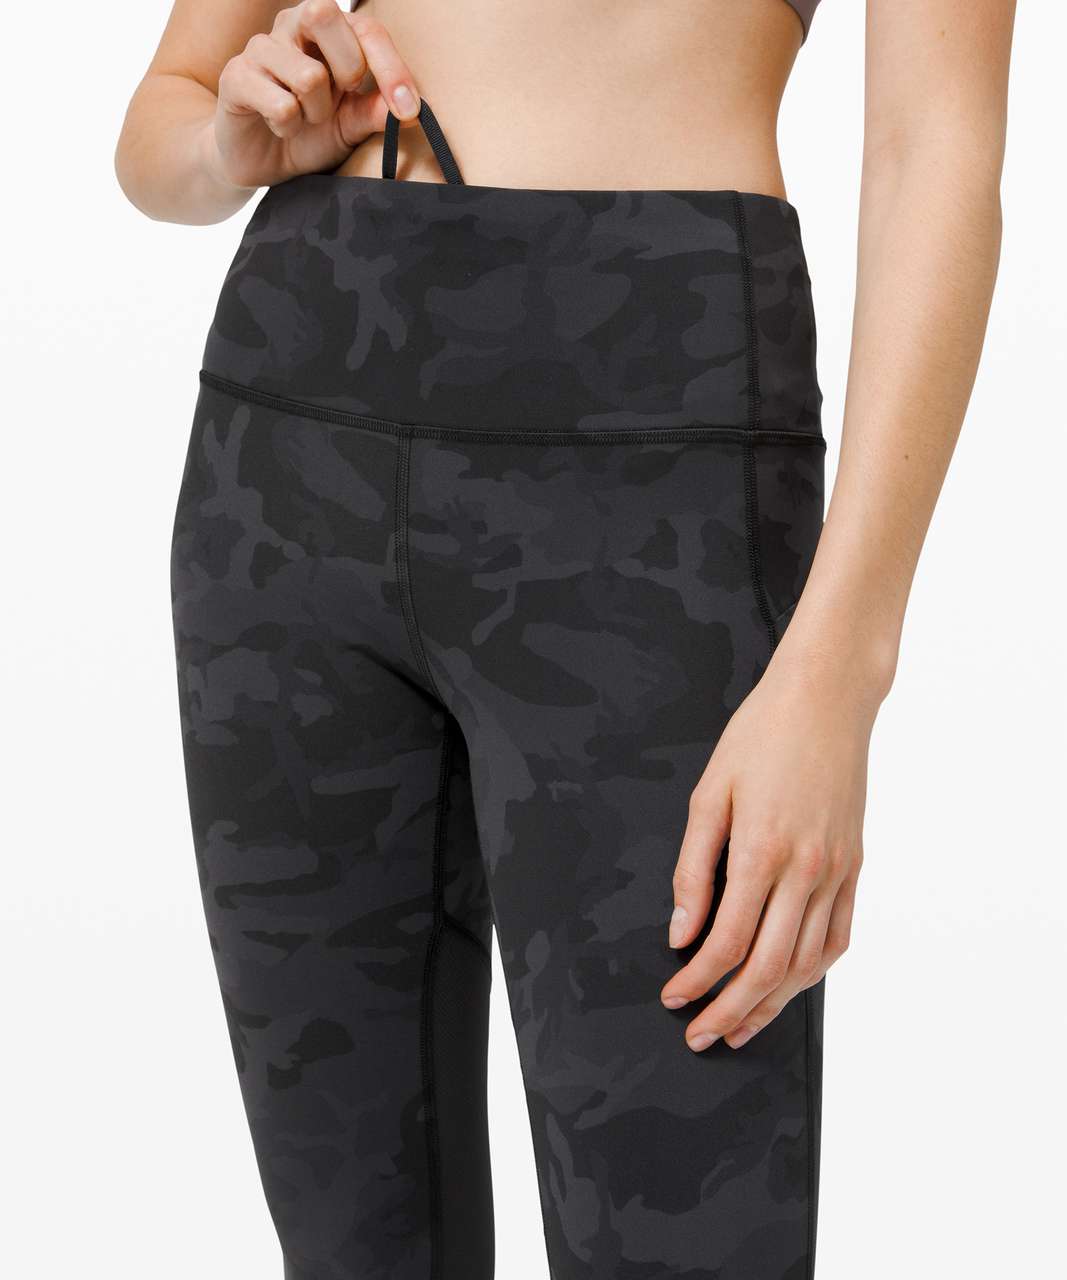 Lululemon Pace Rival High-Rise Crop 22" - Incognito Camo Multi Grey / Black